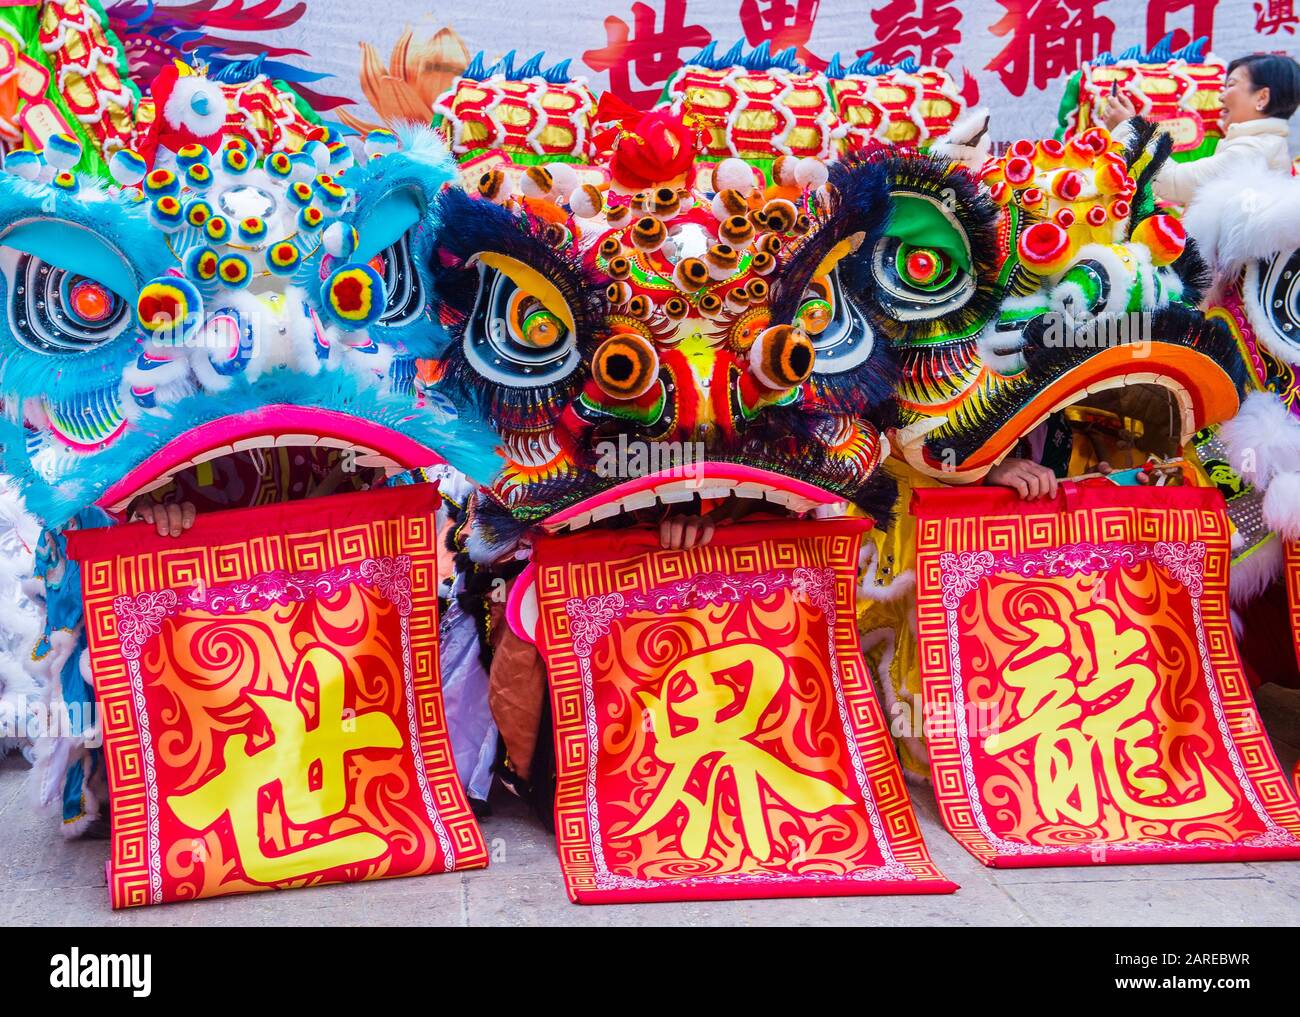 Dancers are waiting for a performance during the Macau International Dragon and Lion Dance Day event at Praca da Amizade in Macau Stock Photo